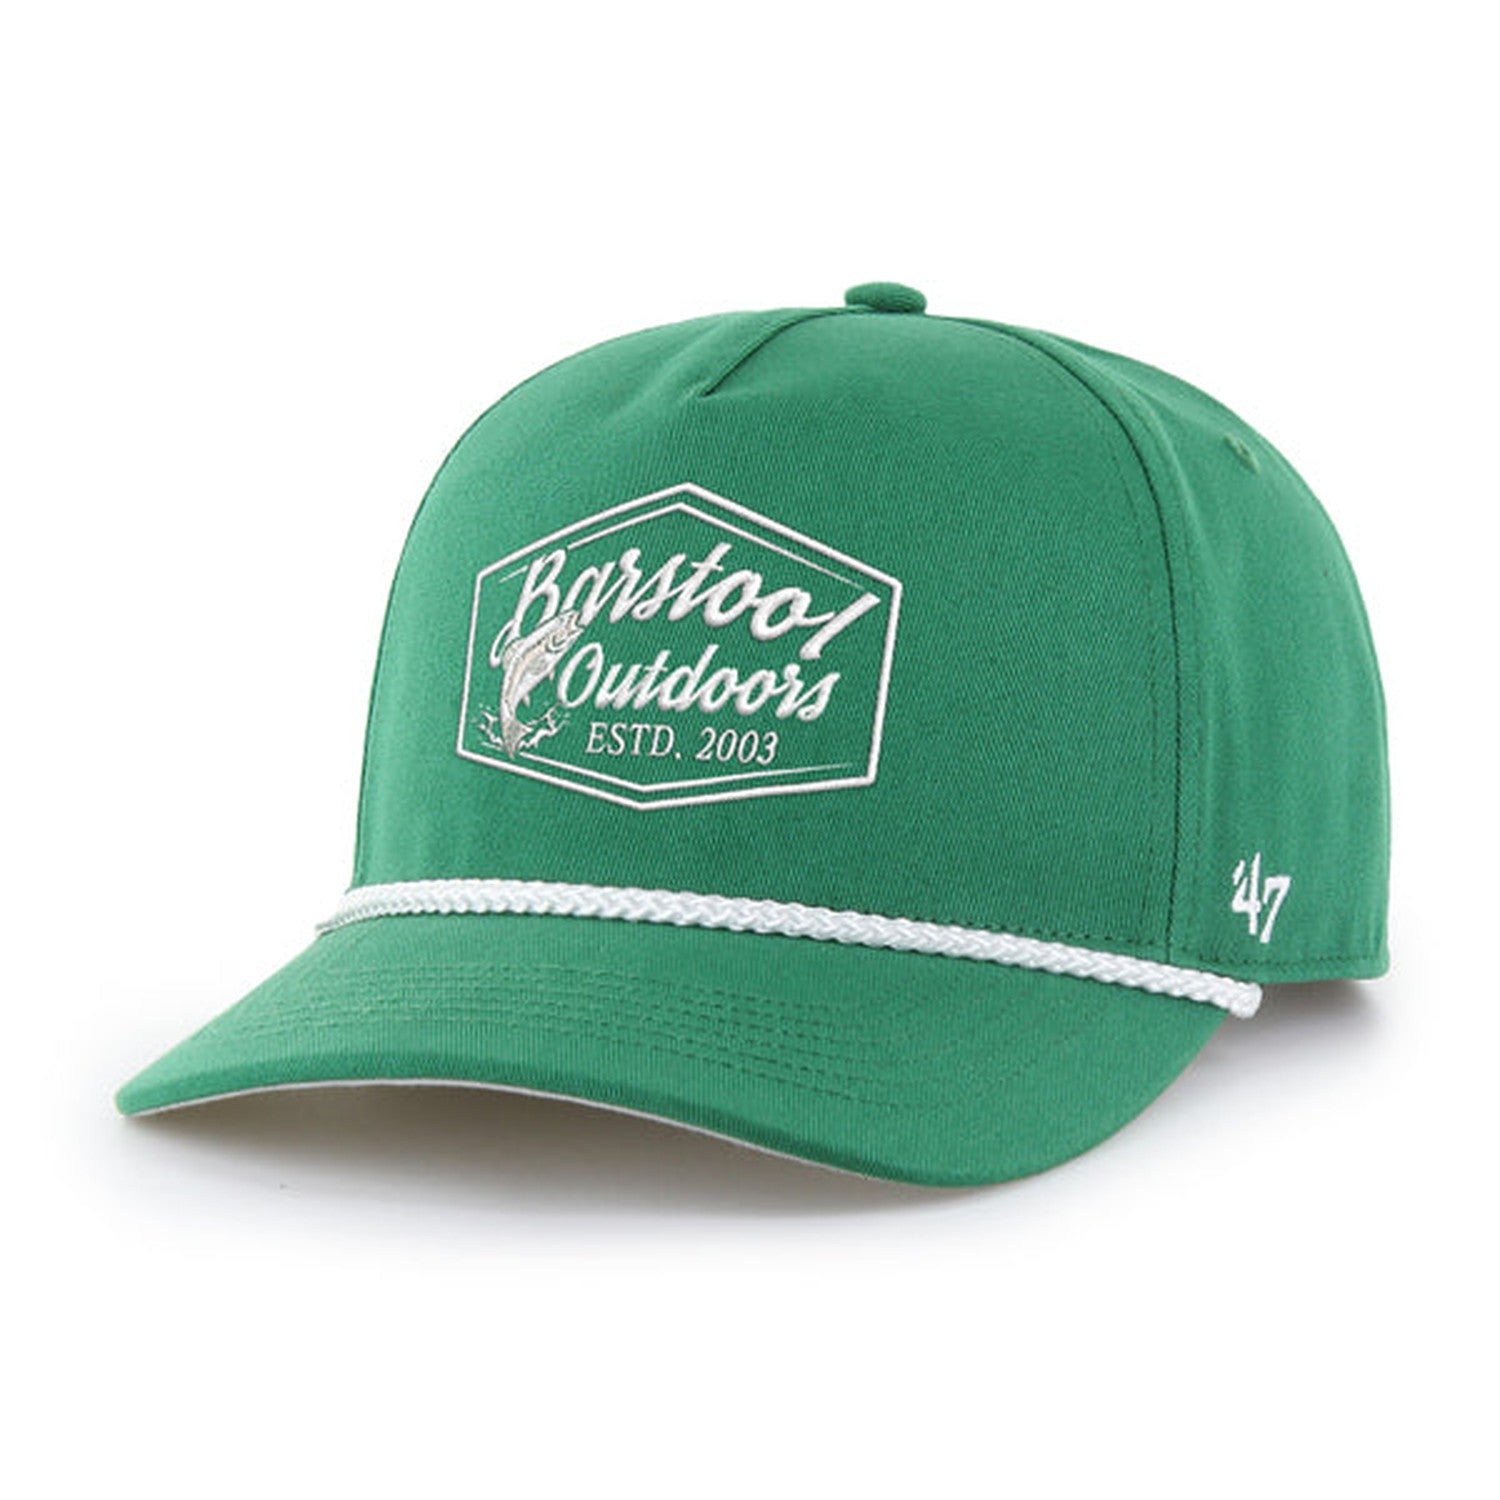 Barstool Outdoors x '47 HITCH Rope Hat